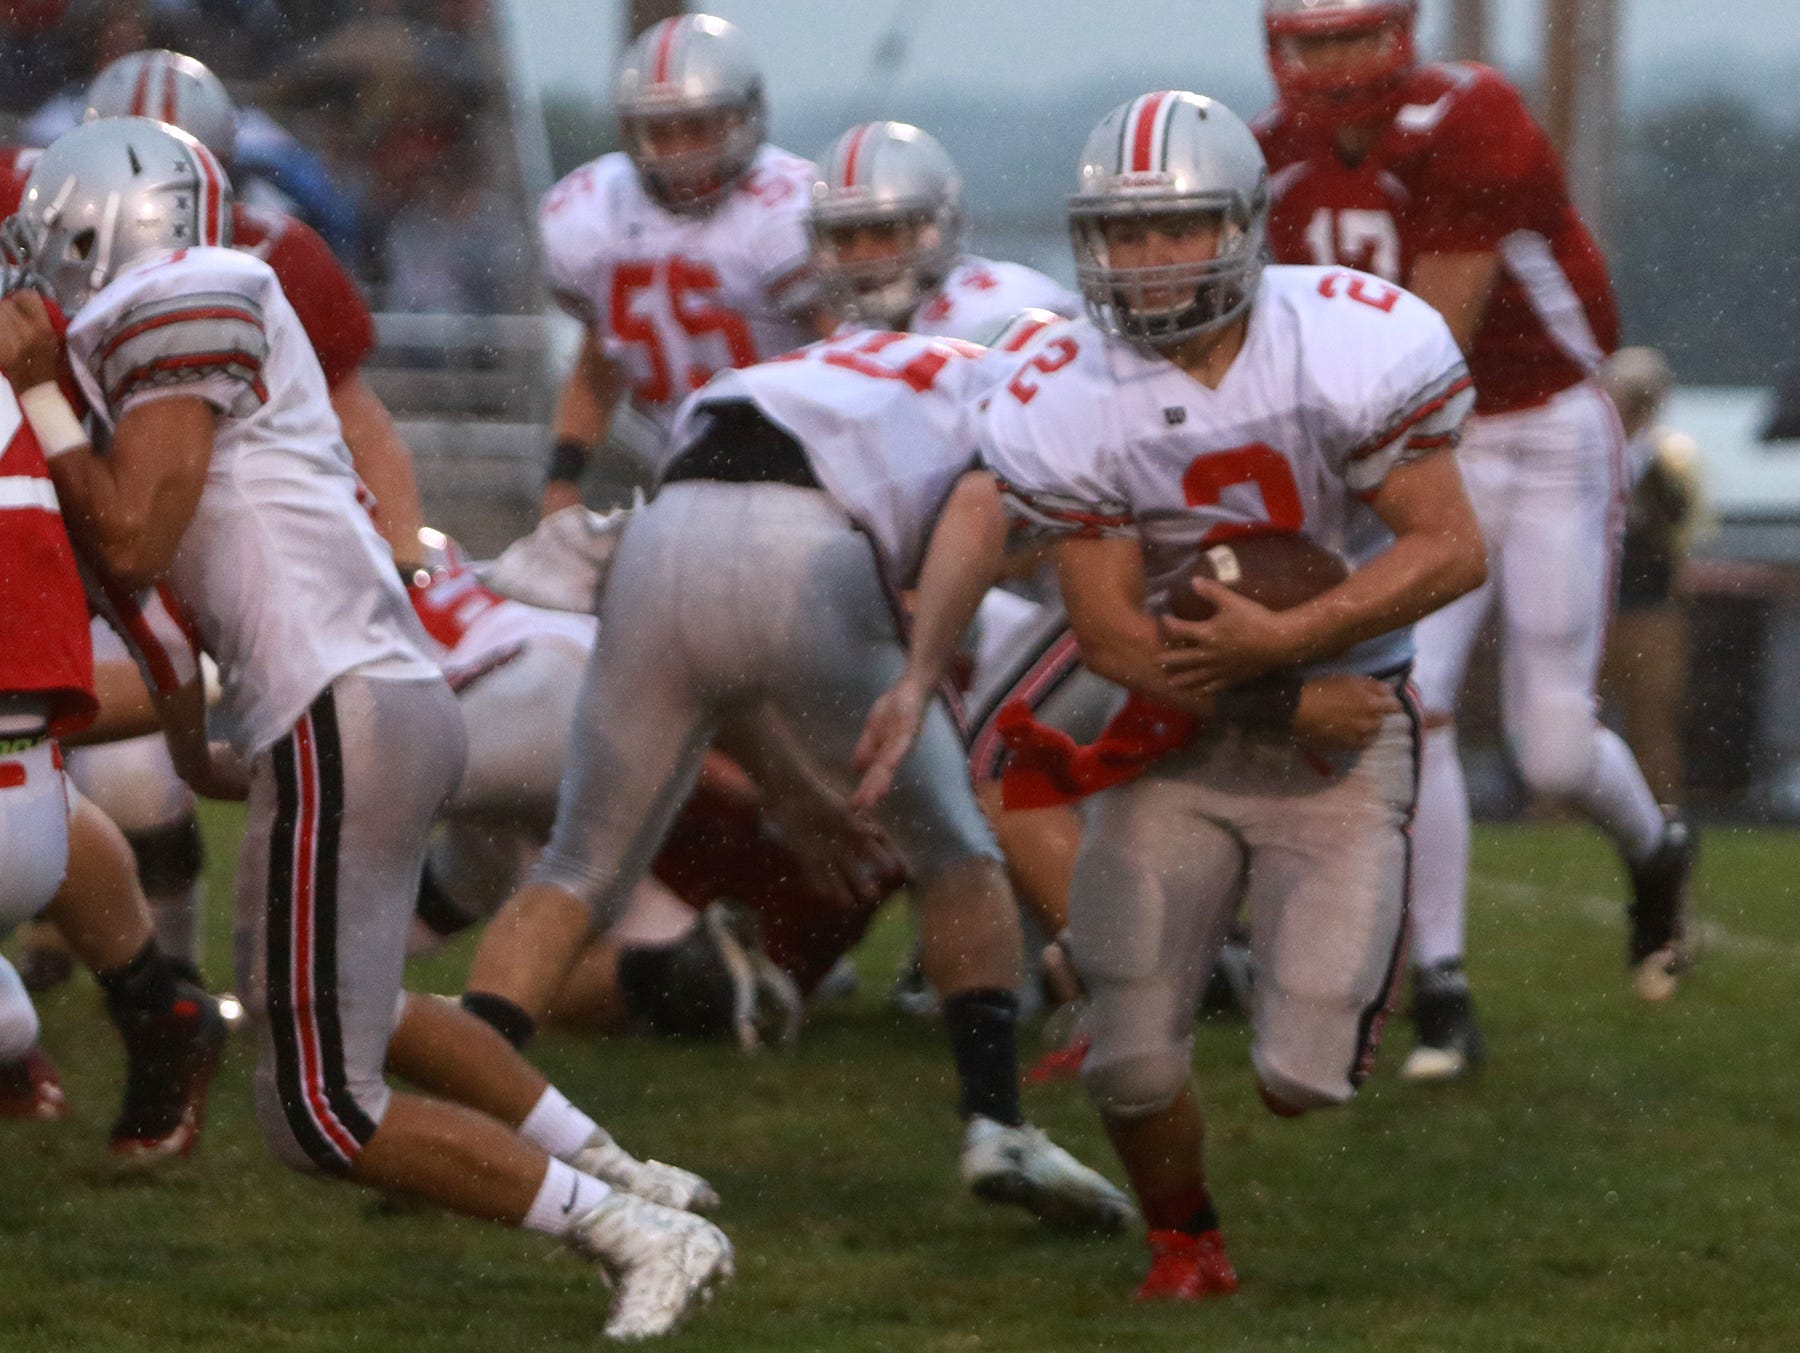 Fredericktown running back Brenden Reed, shown here against Utica, rushed for 11 yards and both touchdowns as the Freddies upset No. 1 seed Fort Frye in a Division VI playoff opener.